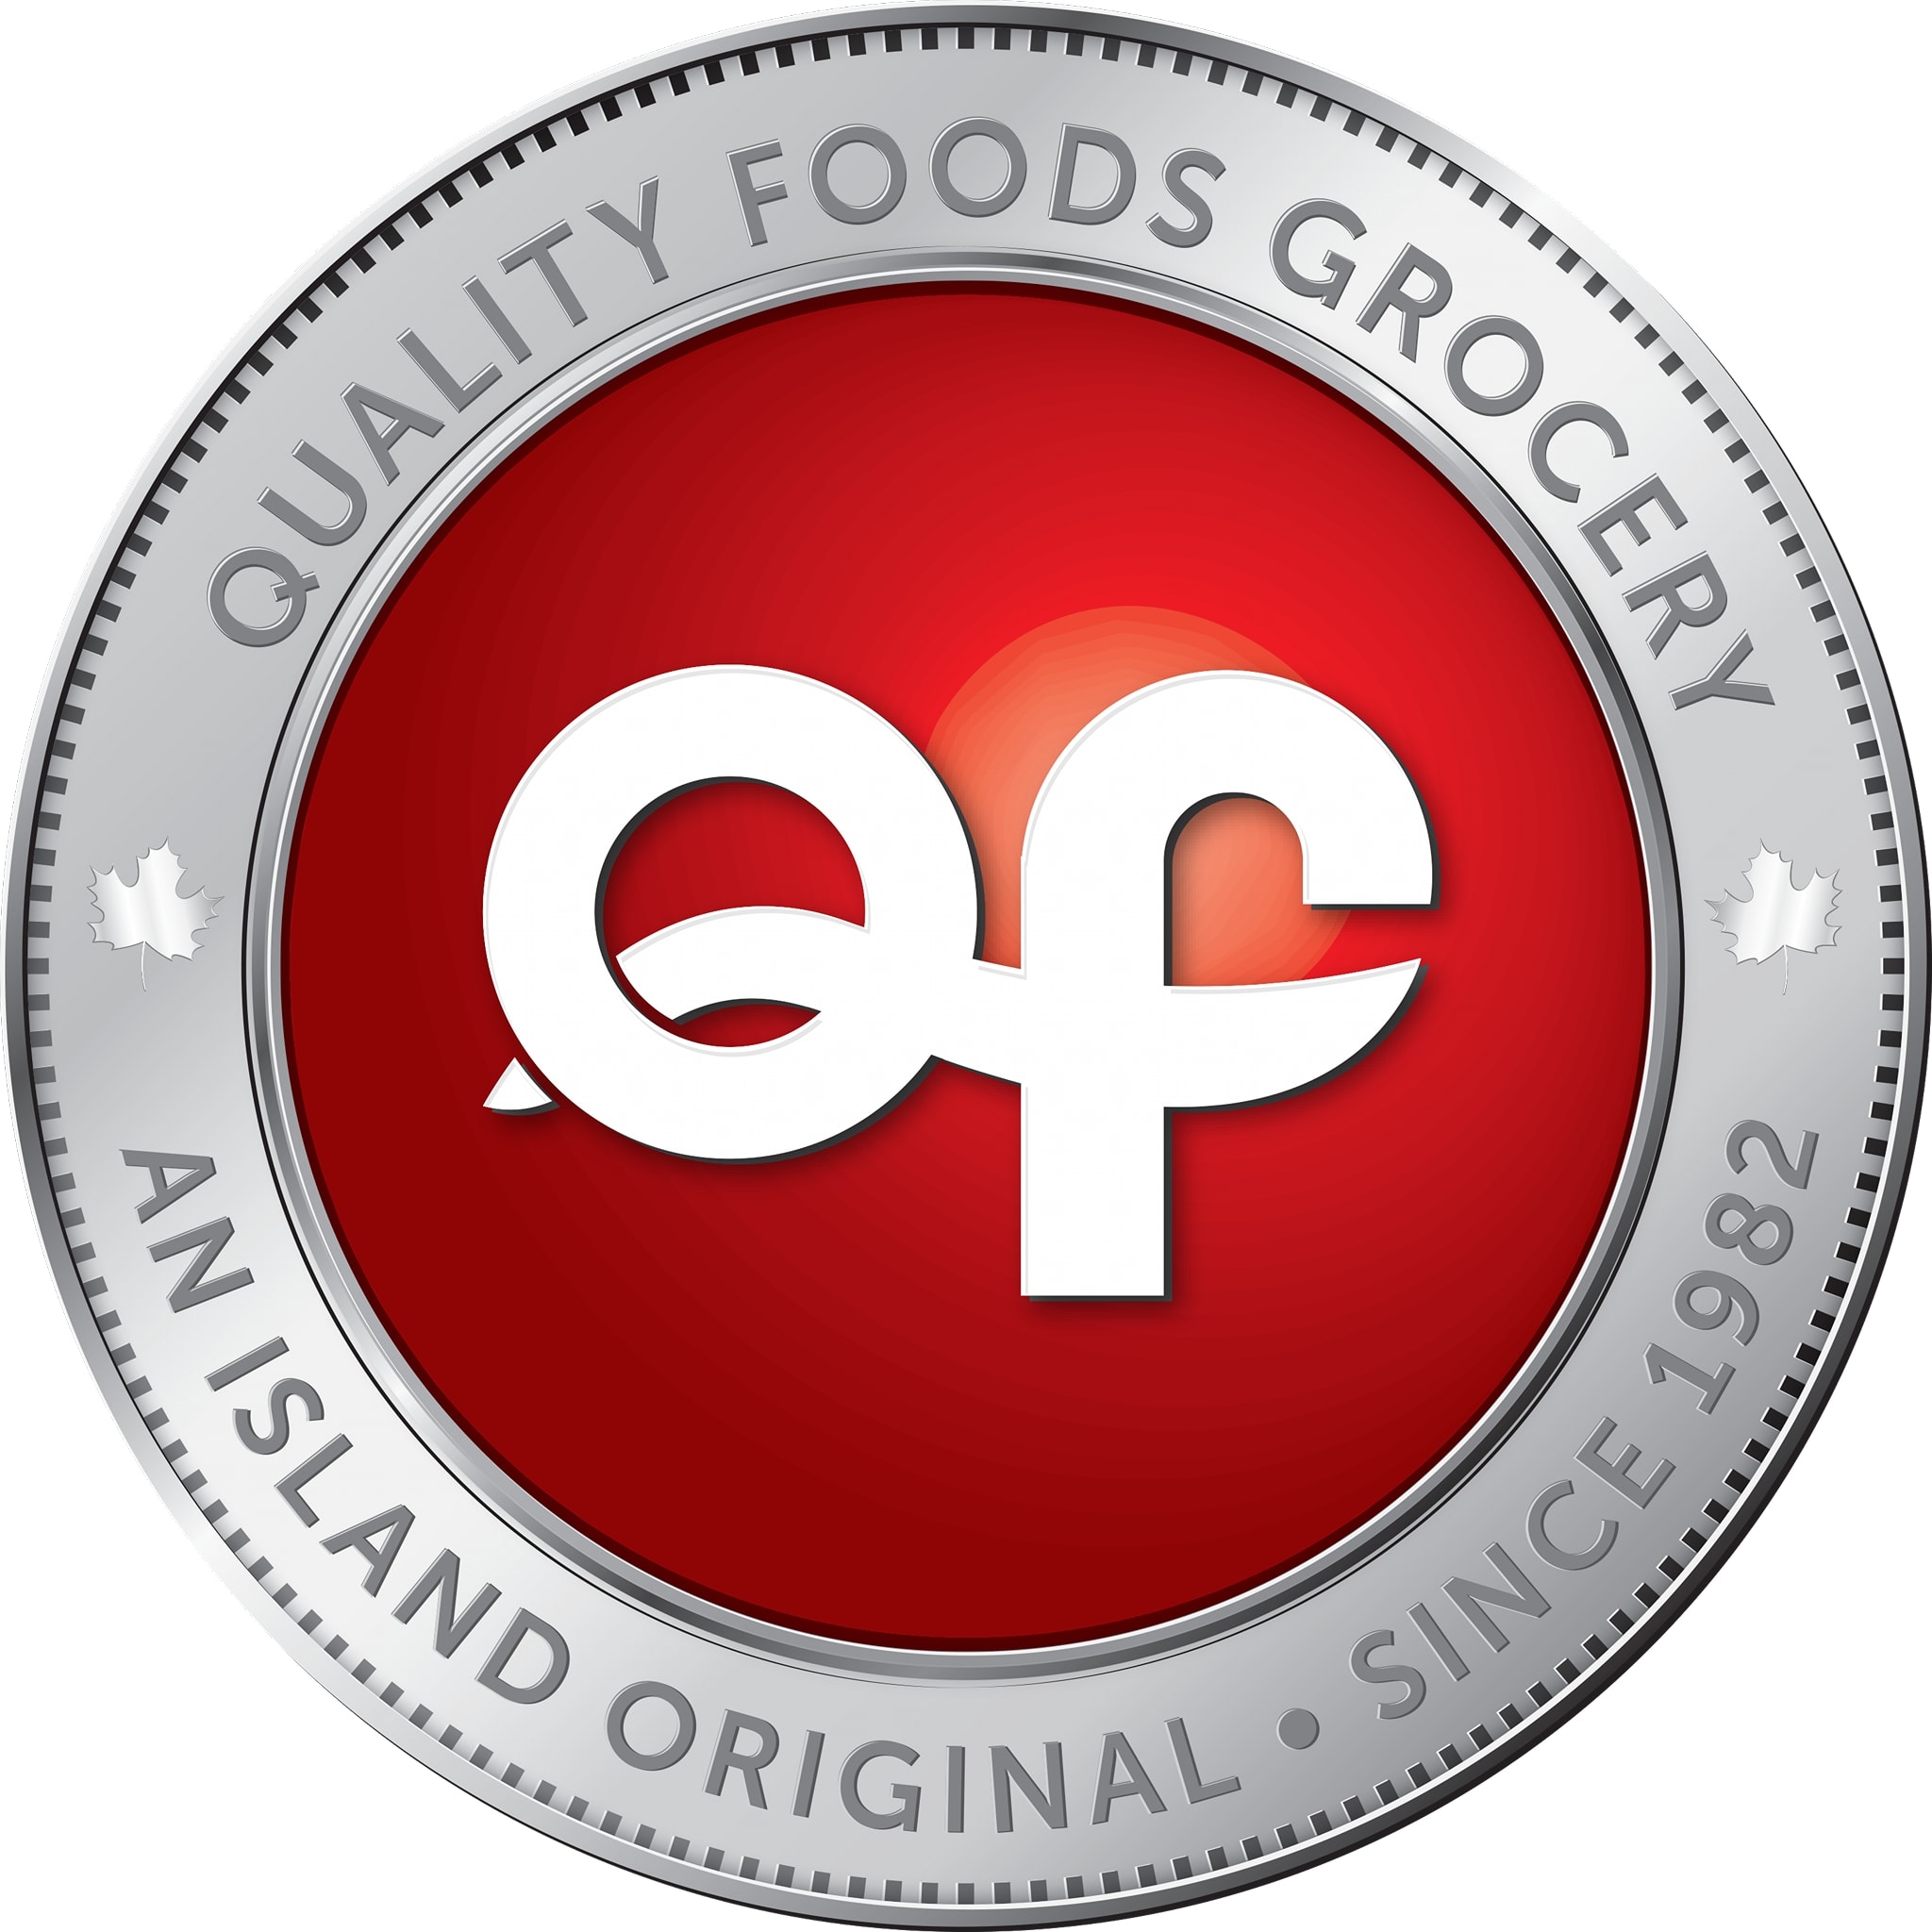 View Quality Foods Flyer online